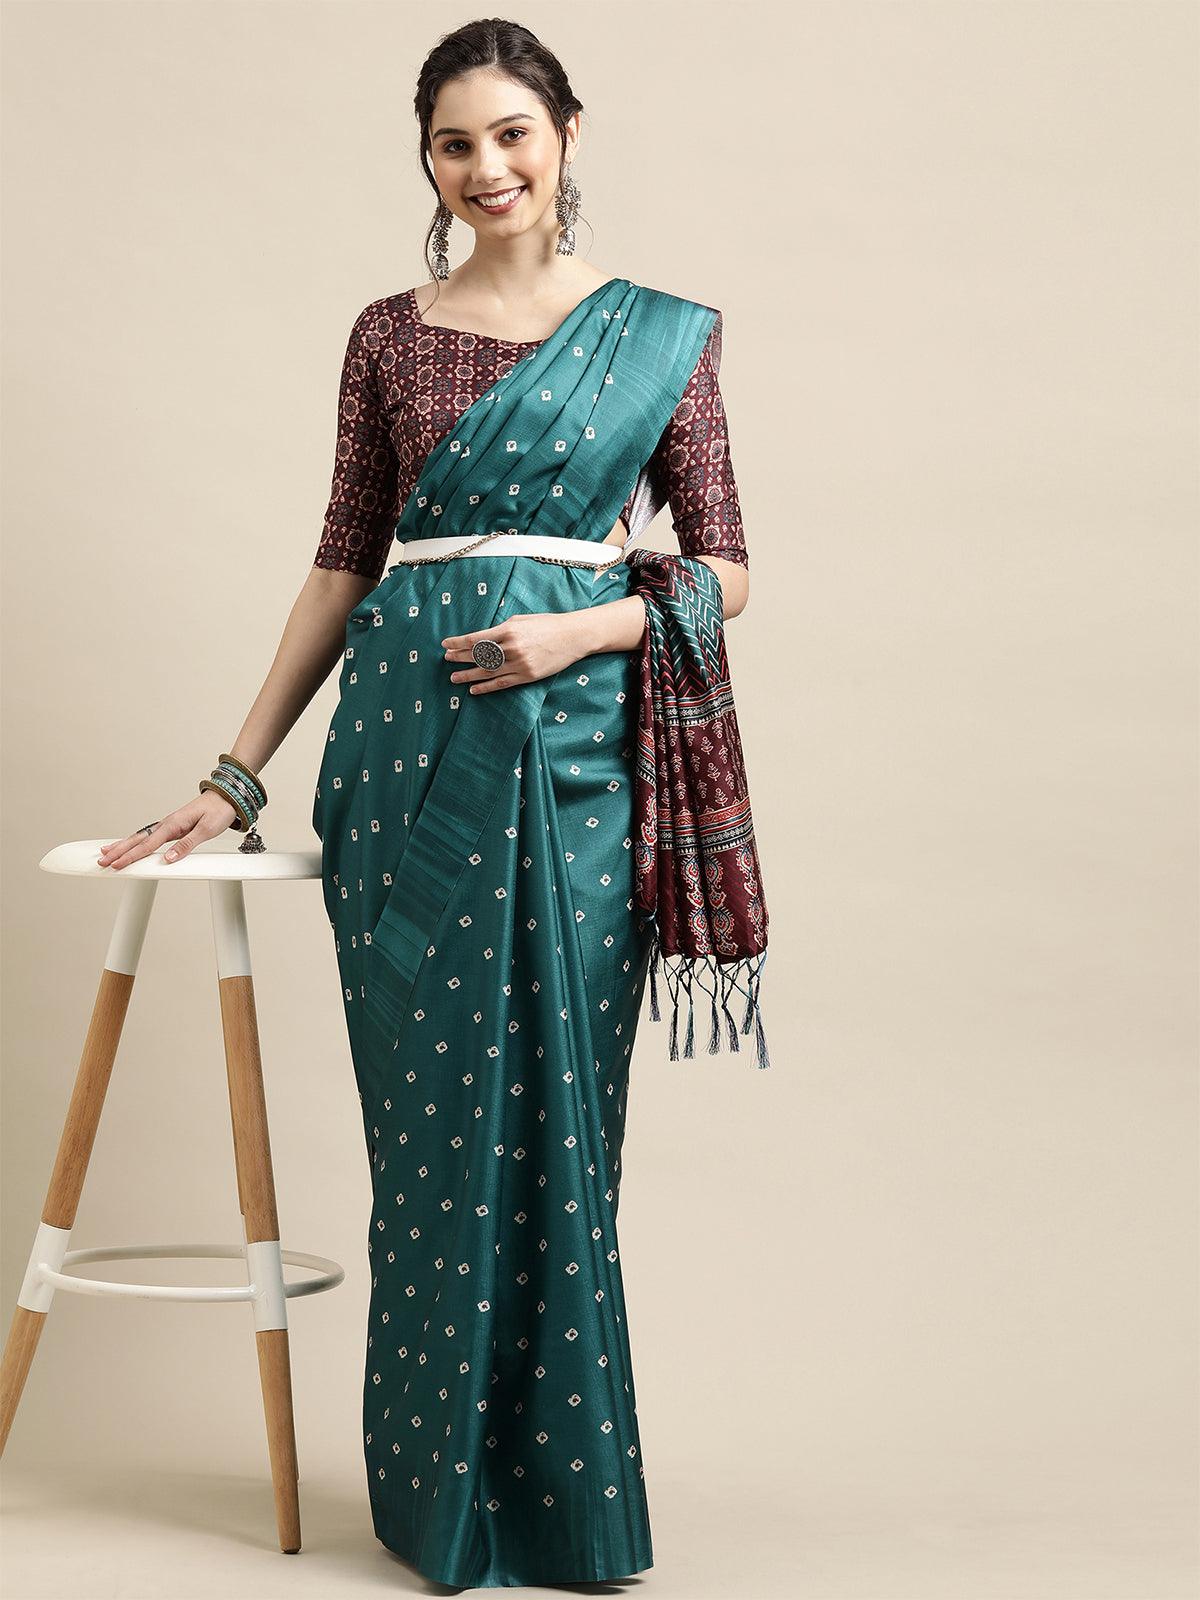 Teal blue Festive Silk Blend Printed Saree With Unstitched Blouse - Odette